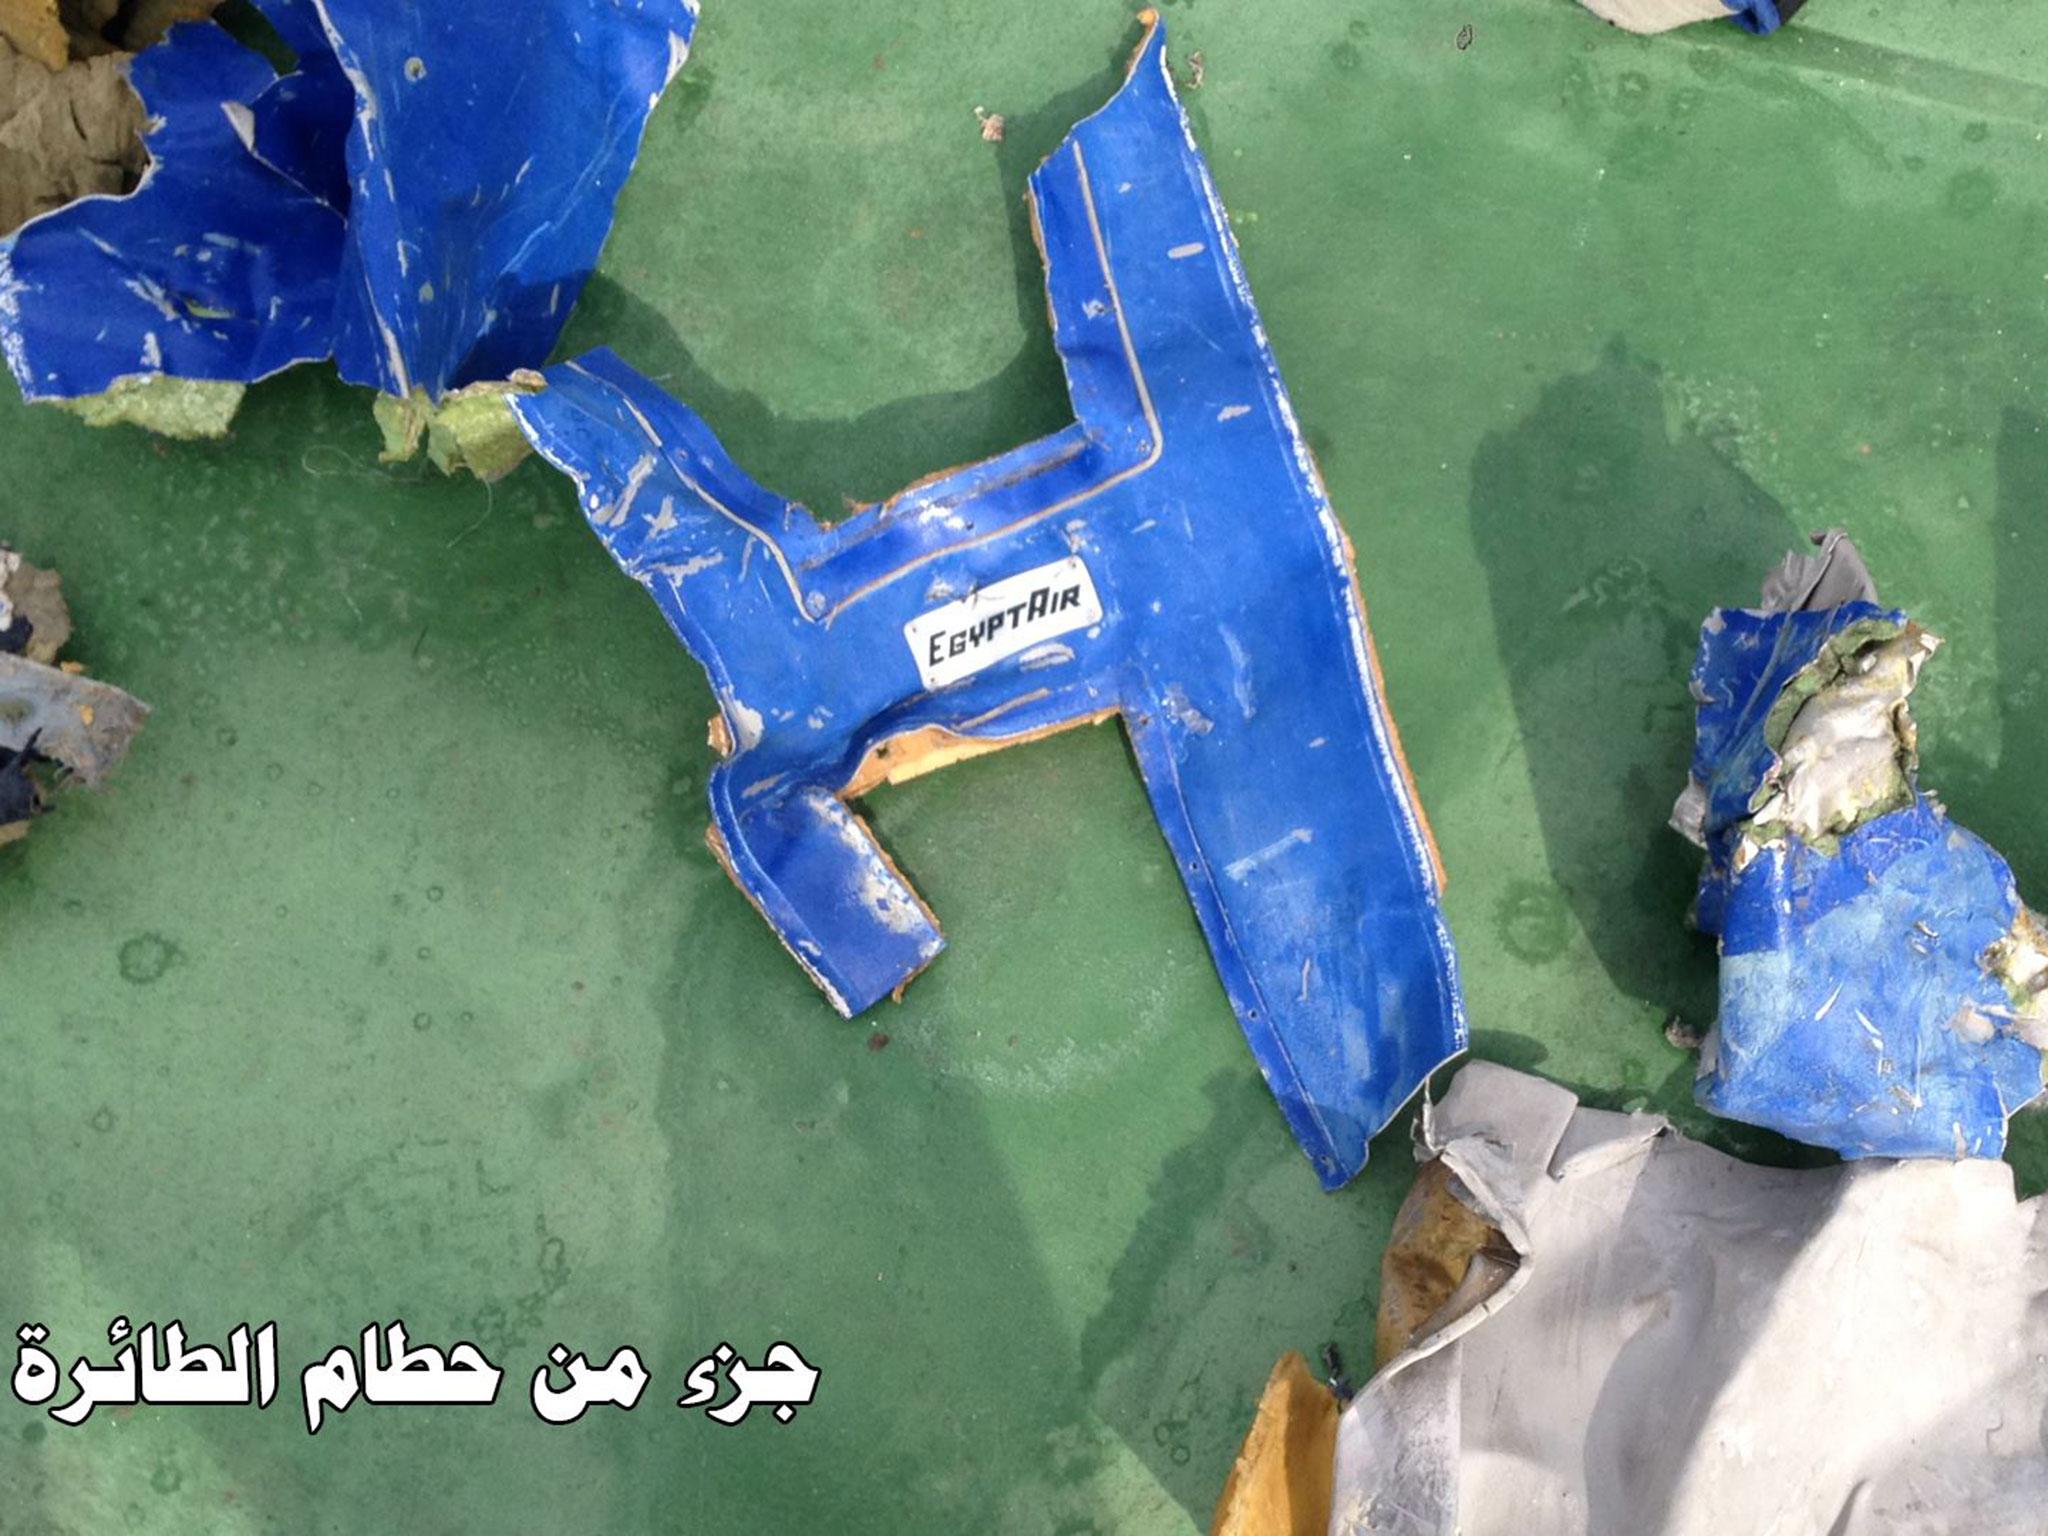 The Egyptian army published photos showing wreckage and debris from EgyptAir flight 804 on 21 May